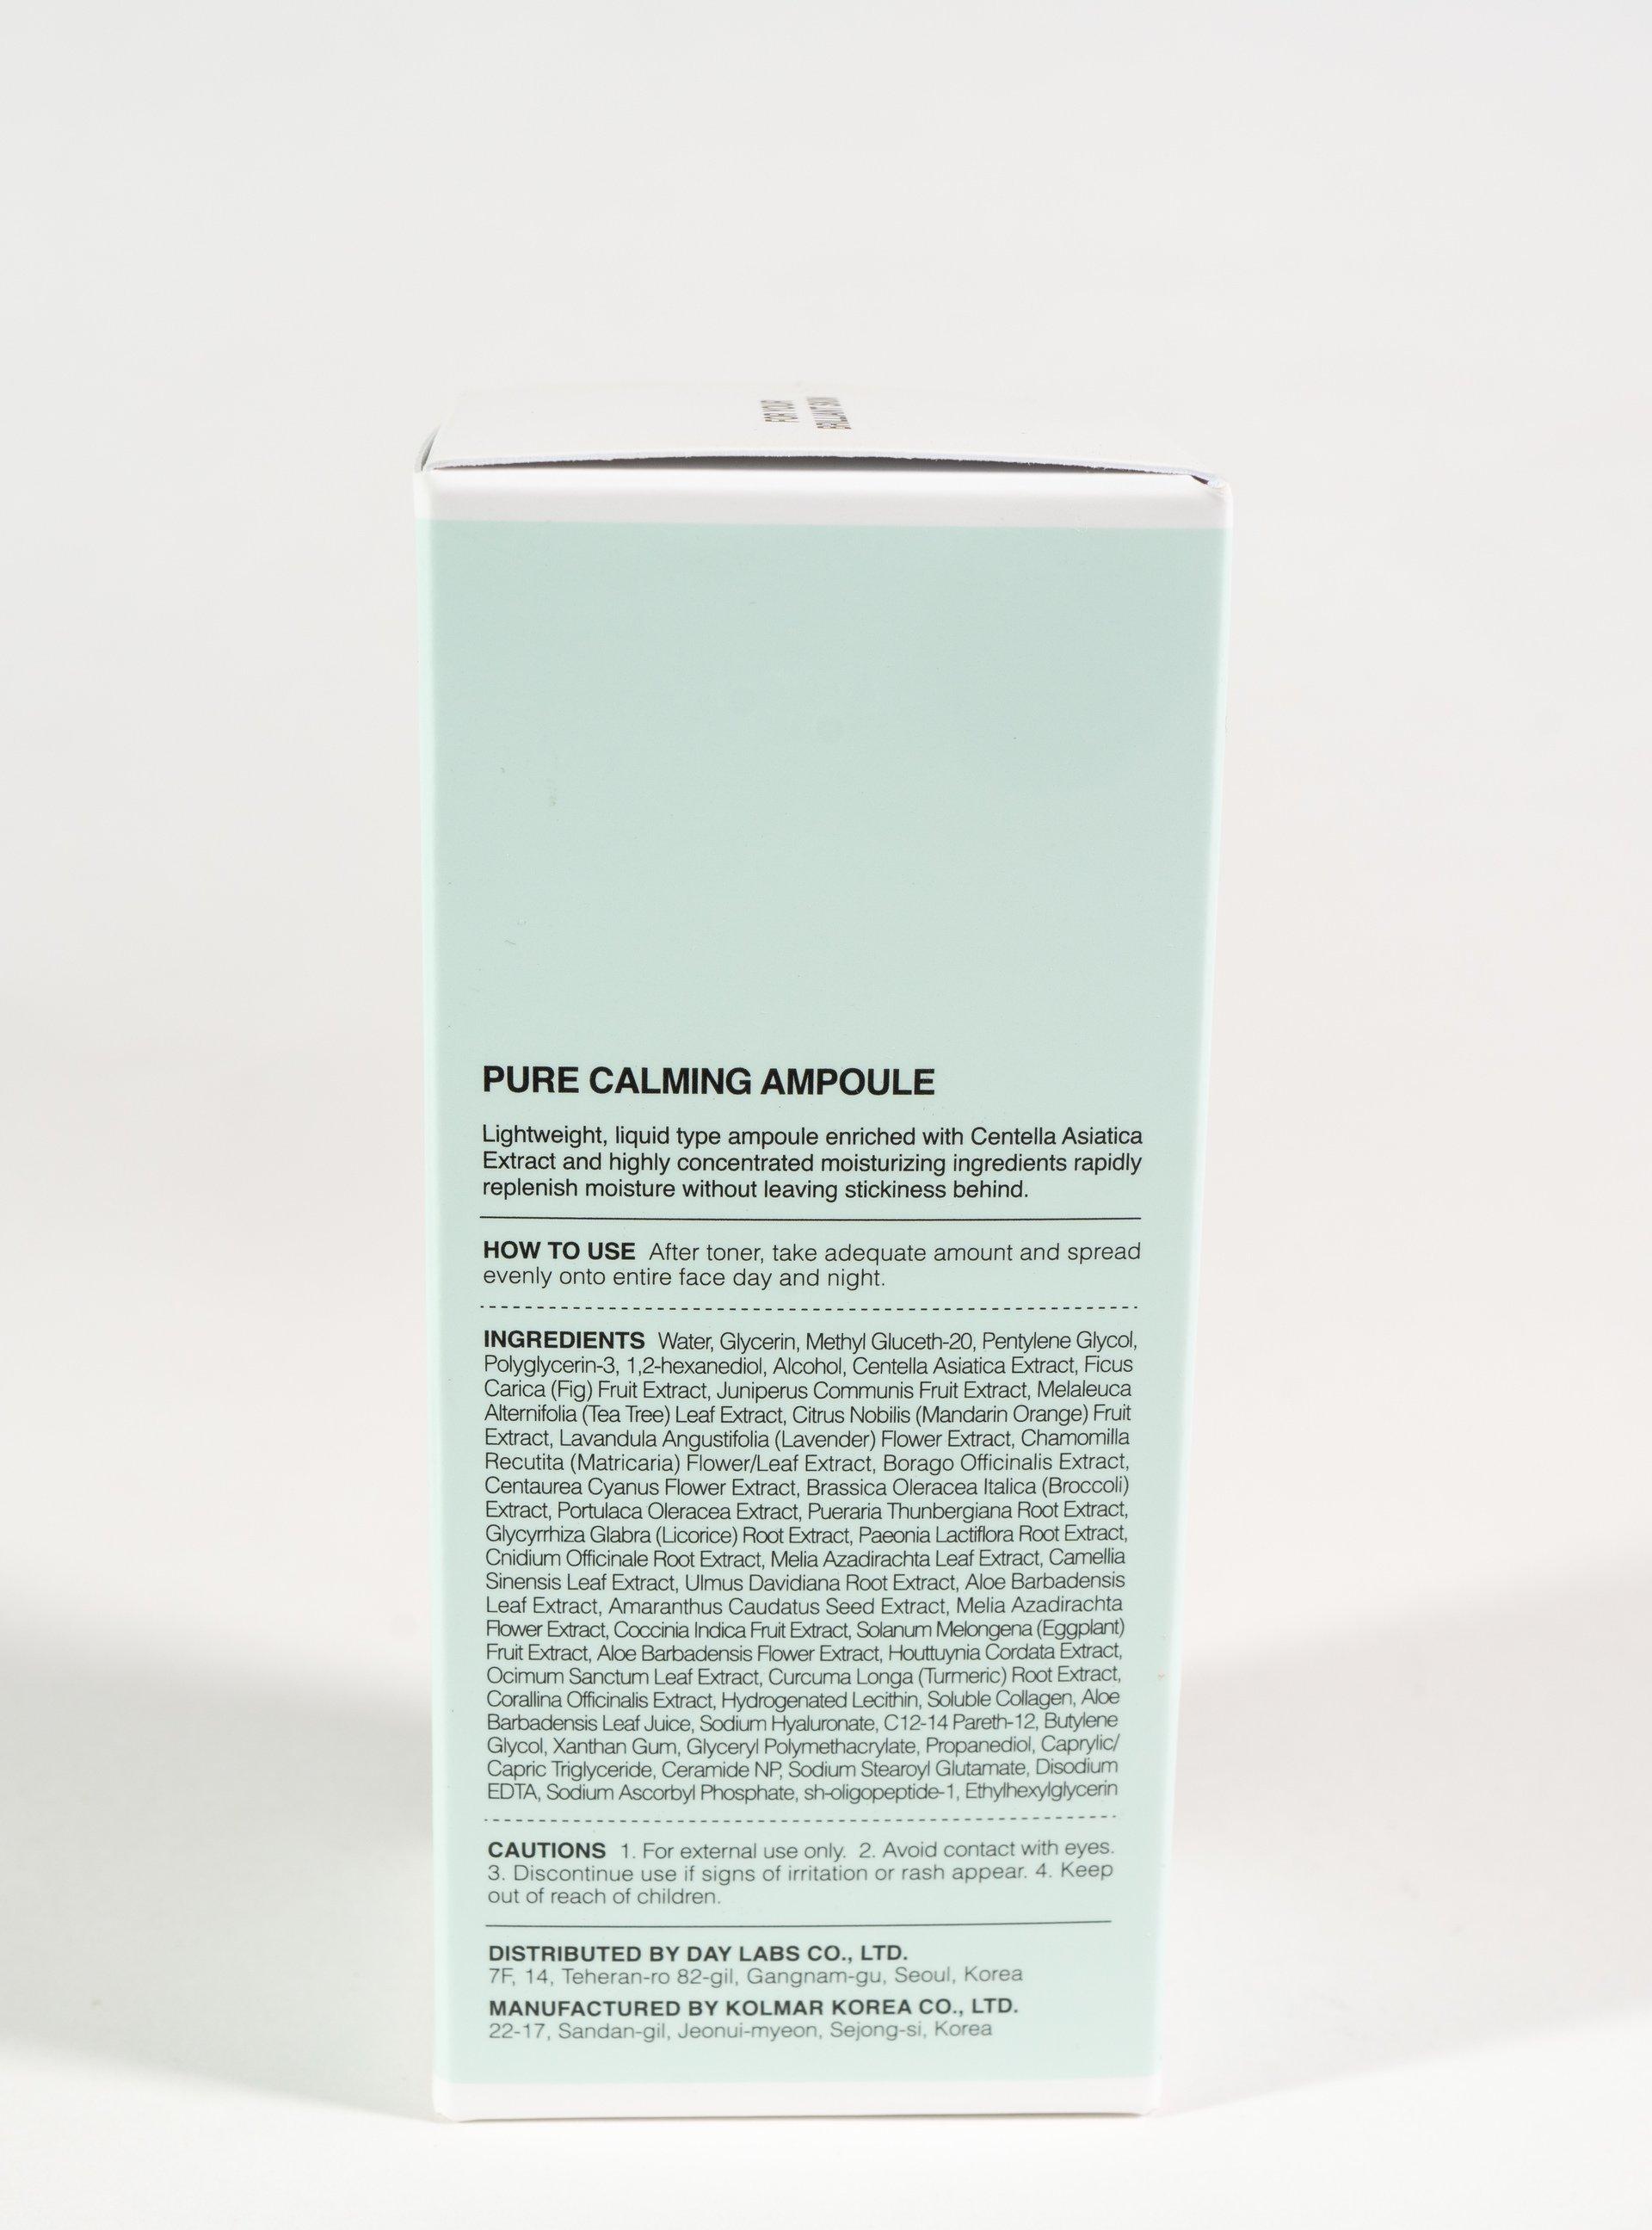 BY ECOM Pure Calming Ampoule 30ml 